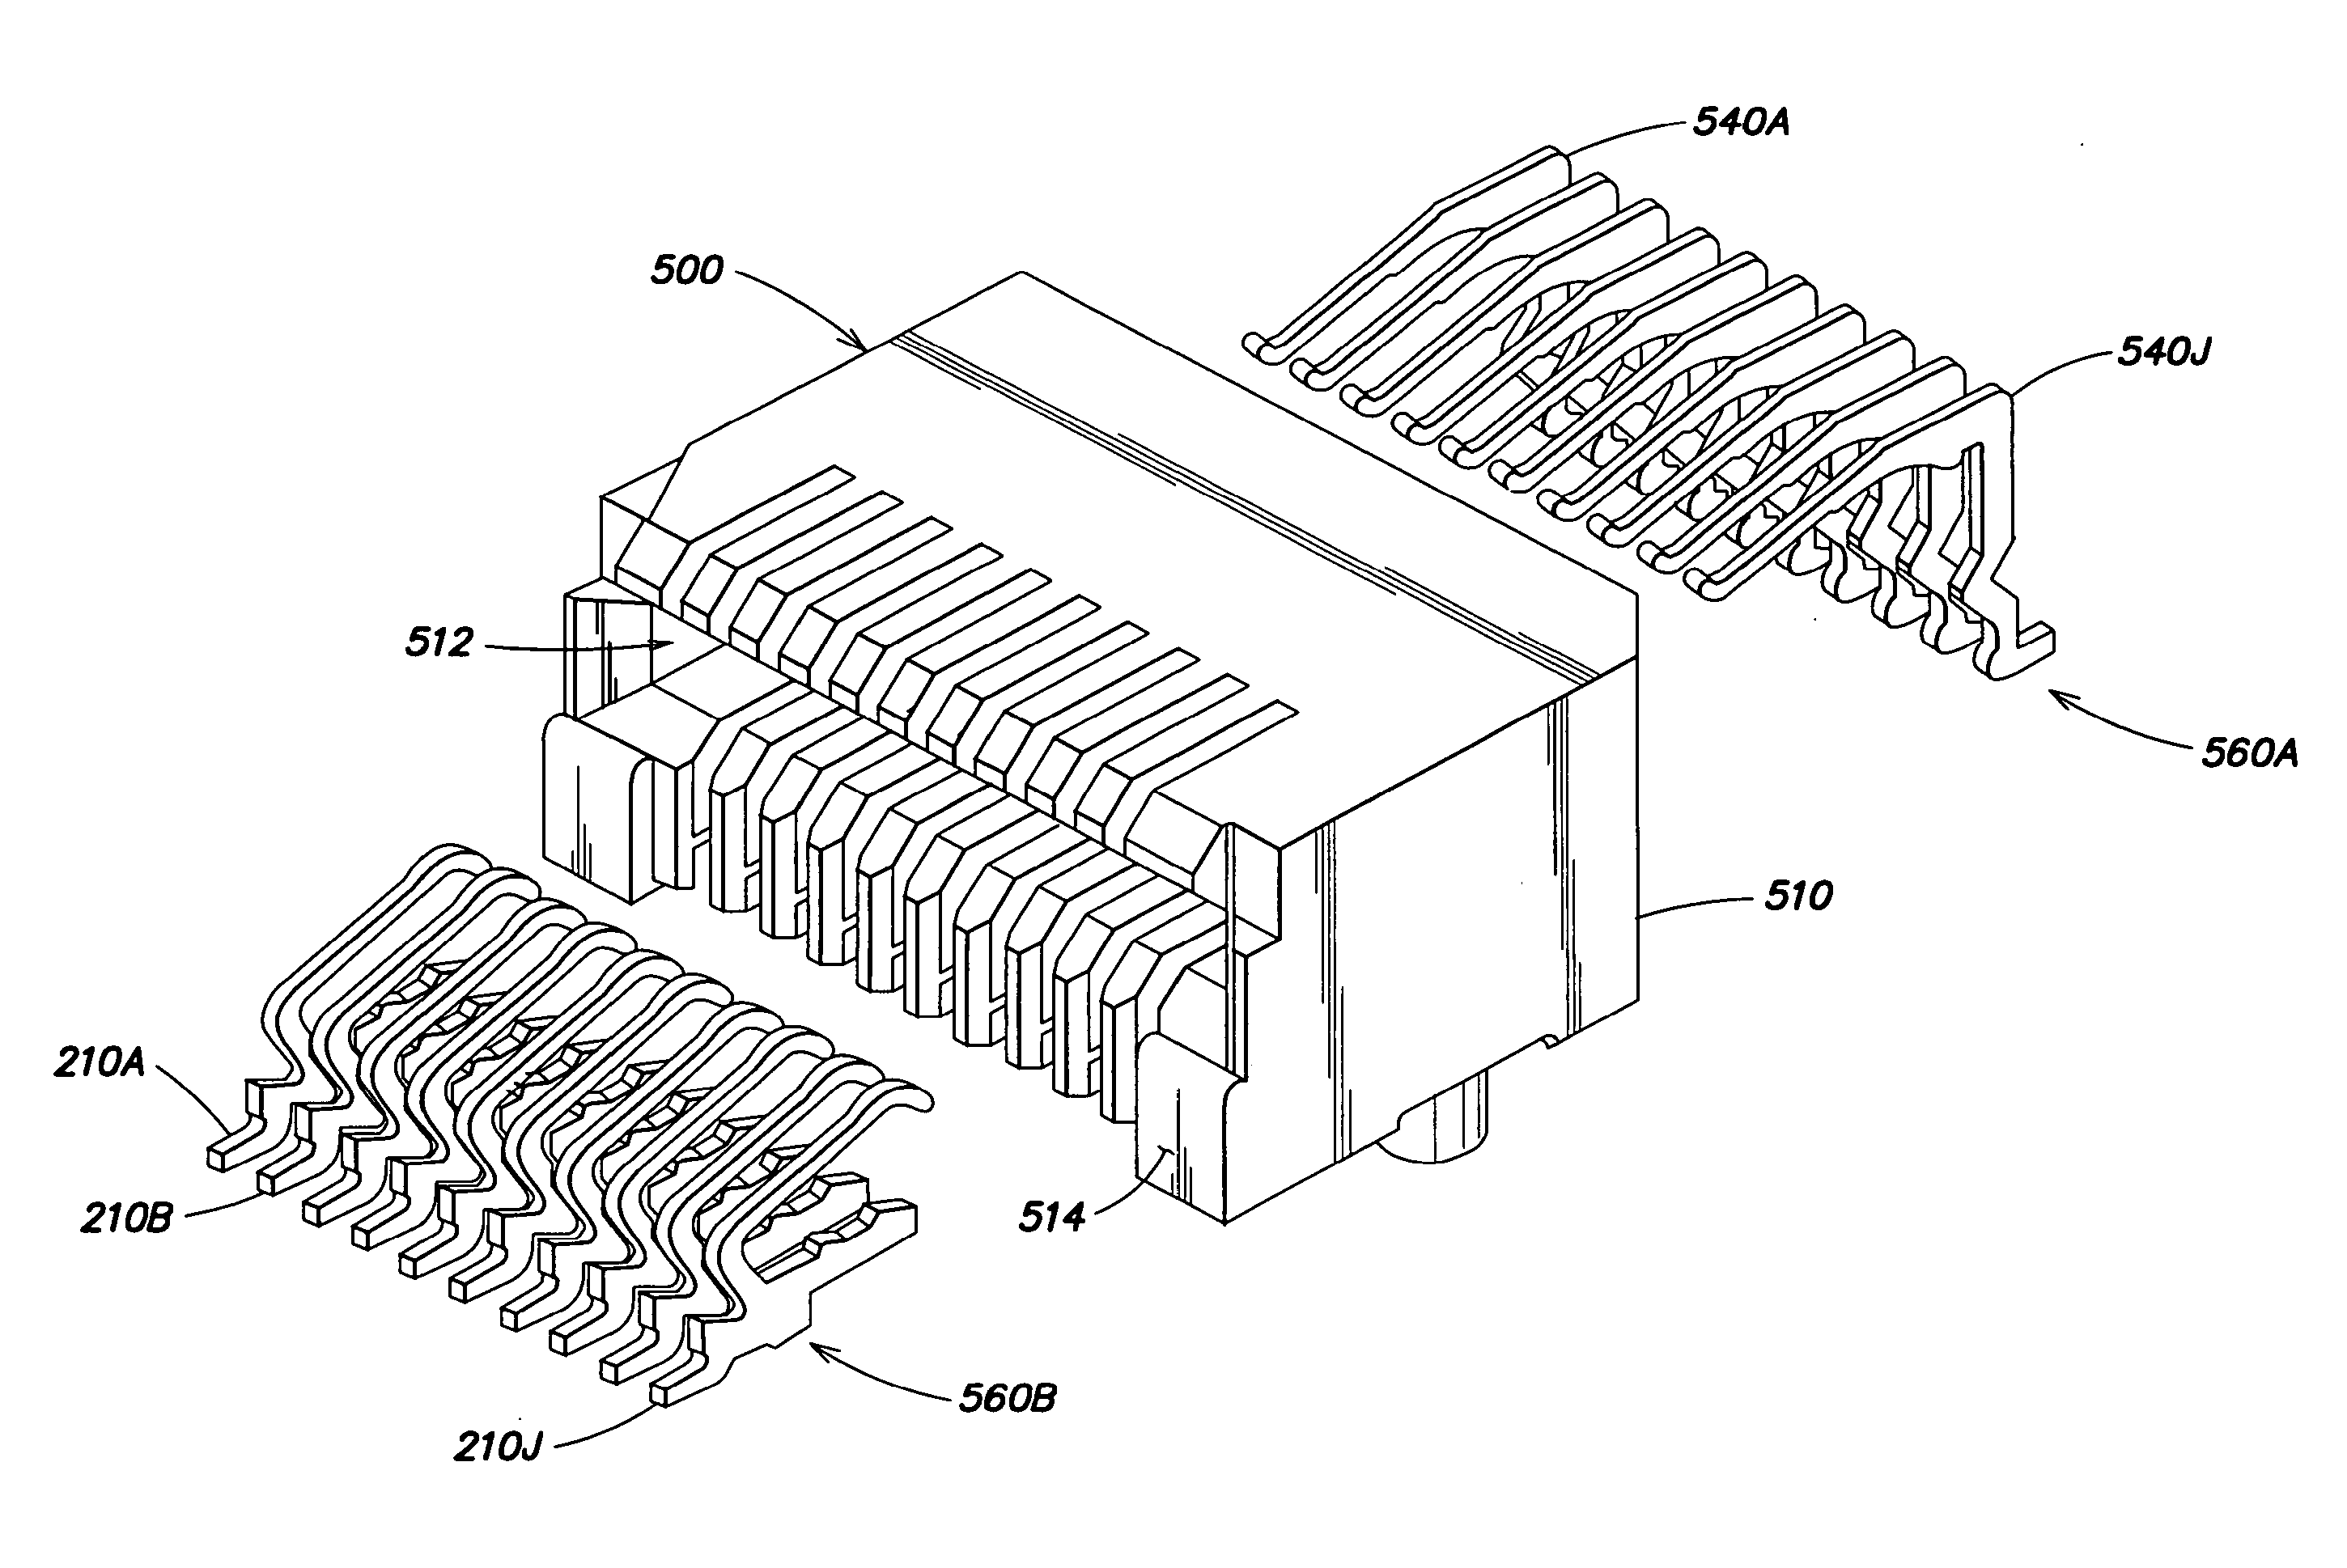 High performance, small form factor connector